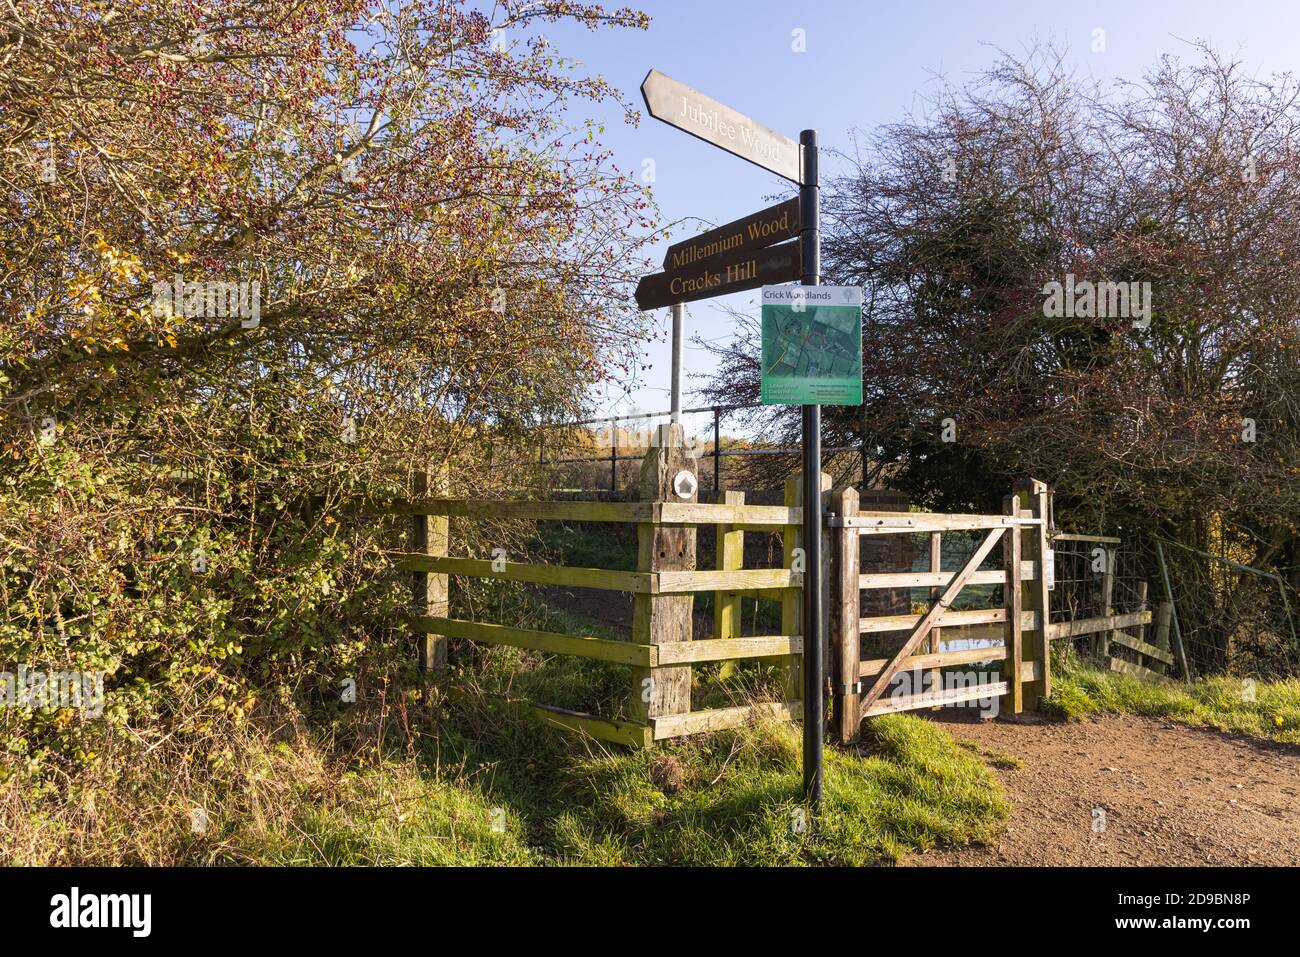 Crick, Northamptonshire - 4/11/20: A metal signpost by a gate on a footpath shows directions to various parts of a public open recreational space. Stock Photo